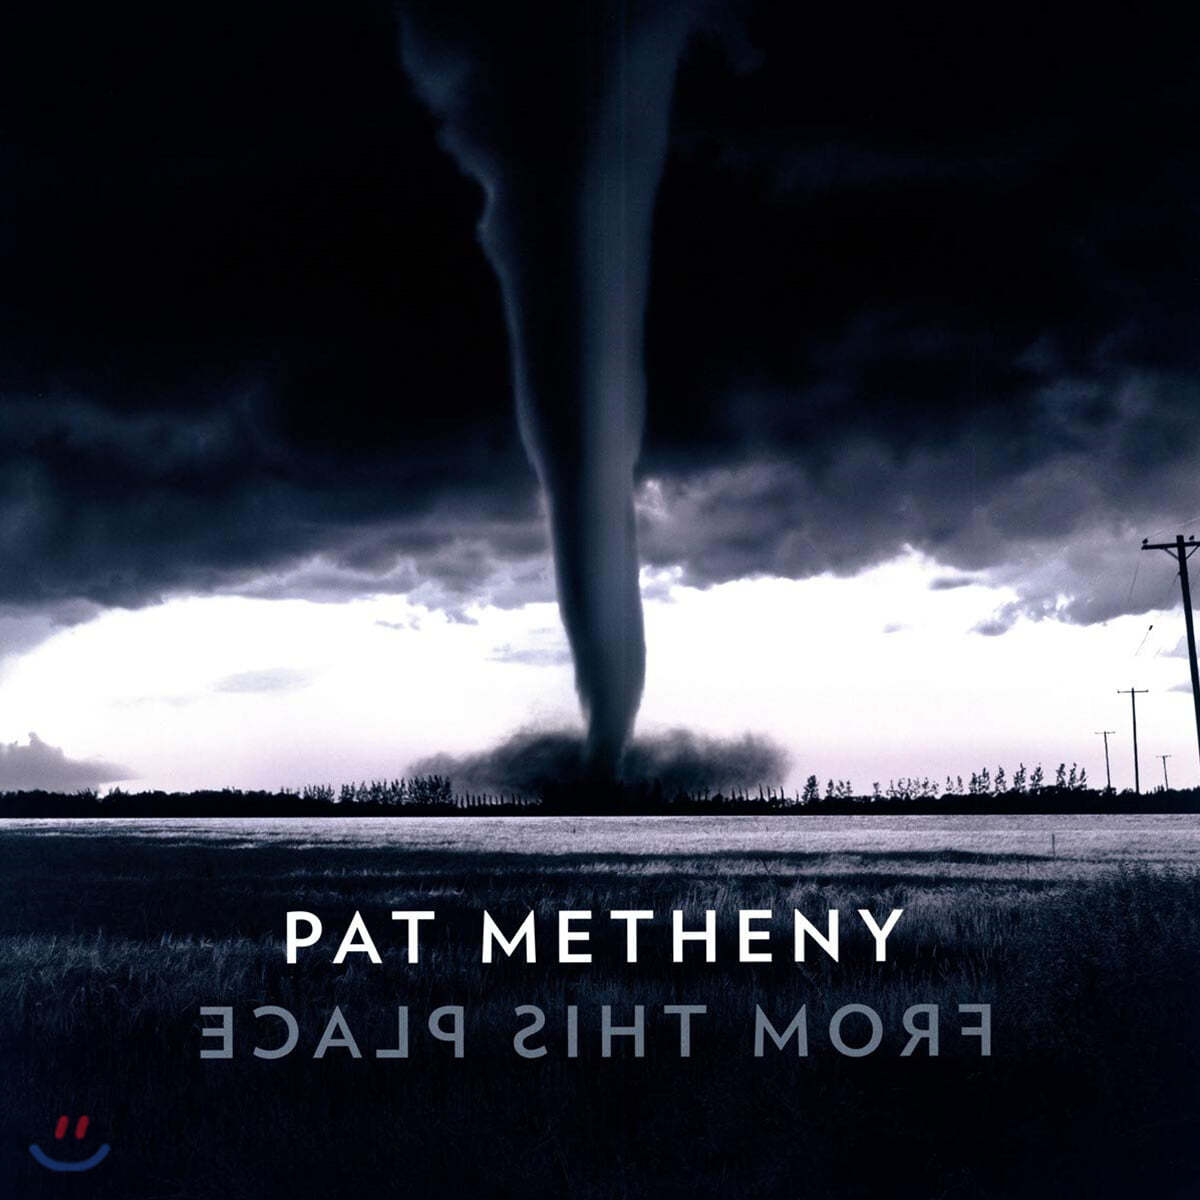 Pat Metheny (팻 매스니) - From This Place [2LP]